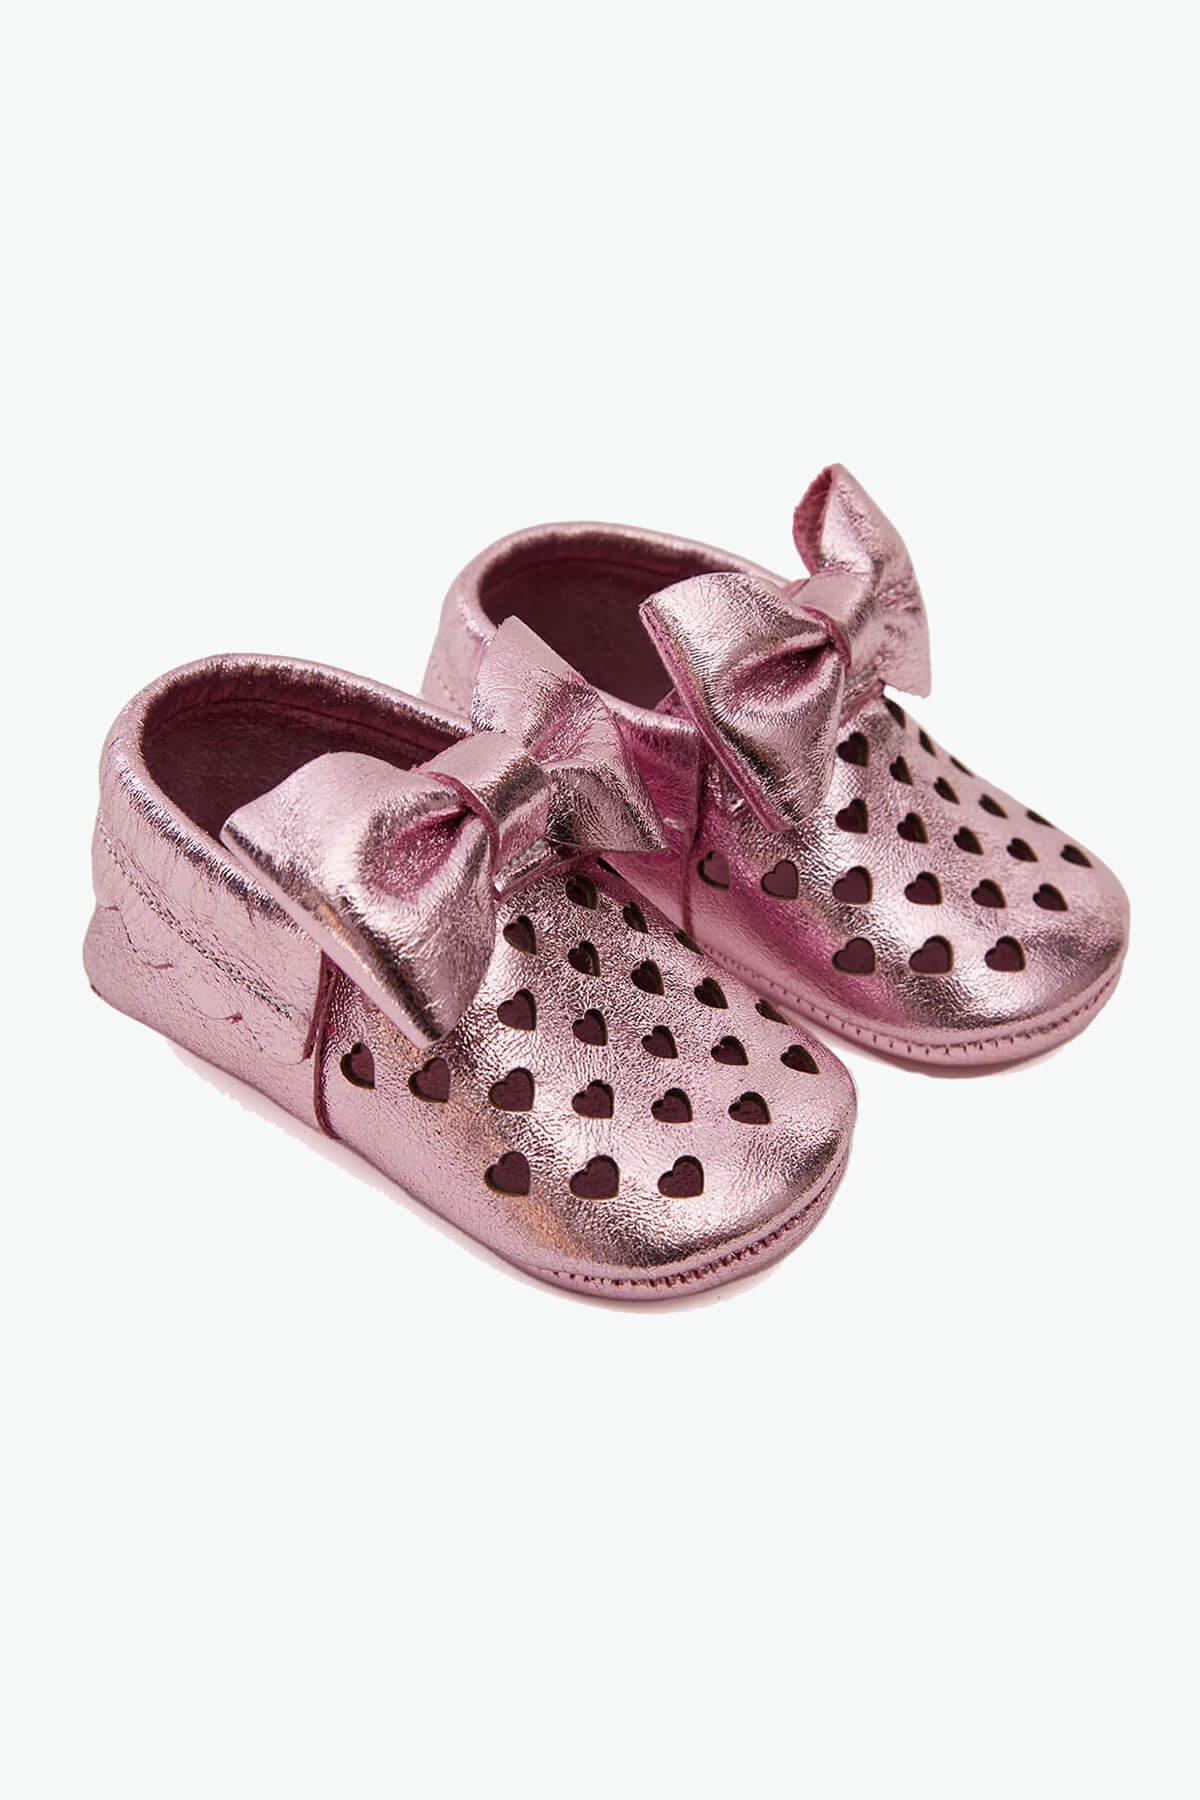 Genuine Leather Elasticated Baby Heart Shoes Pink